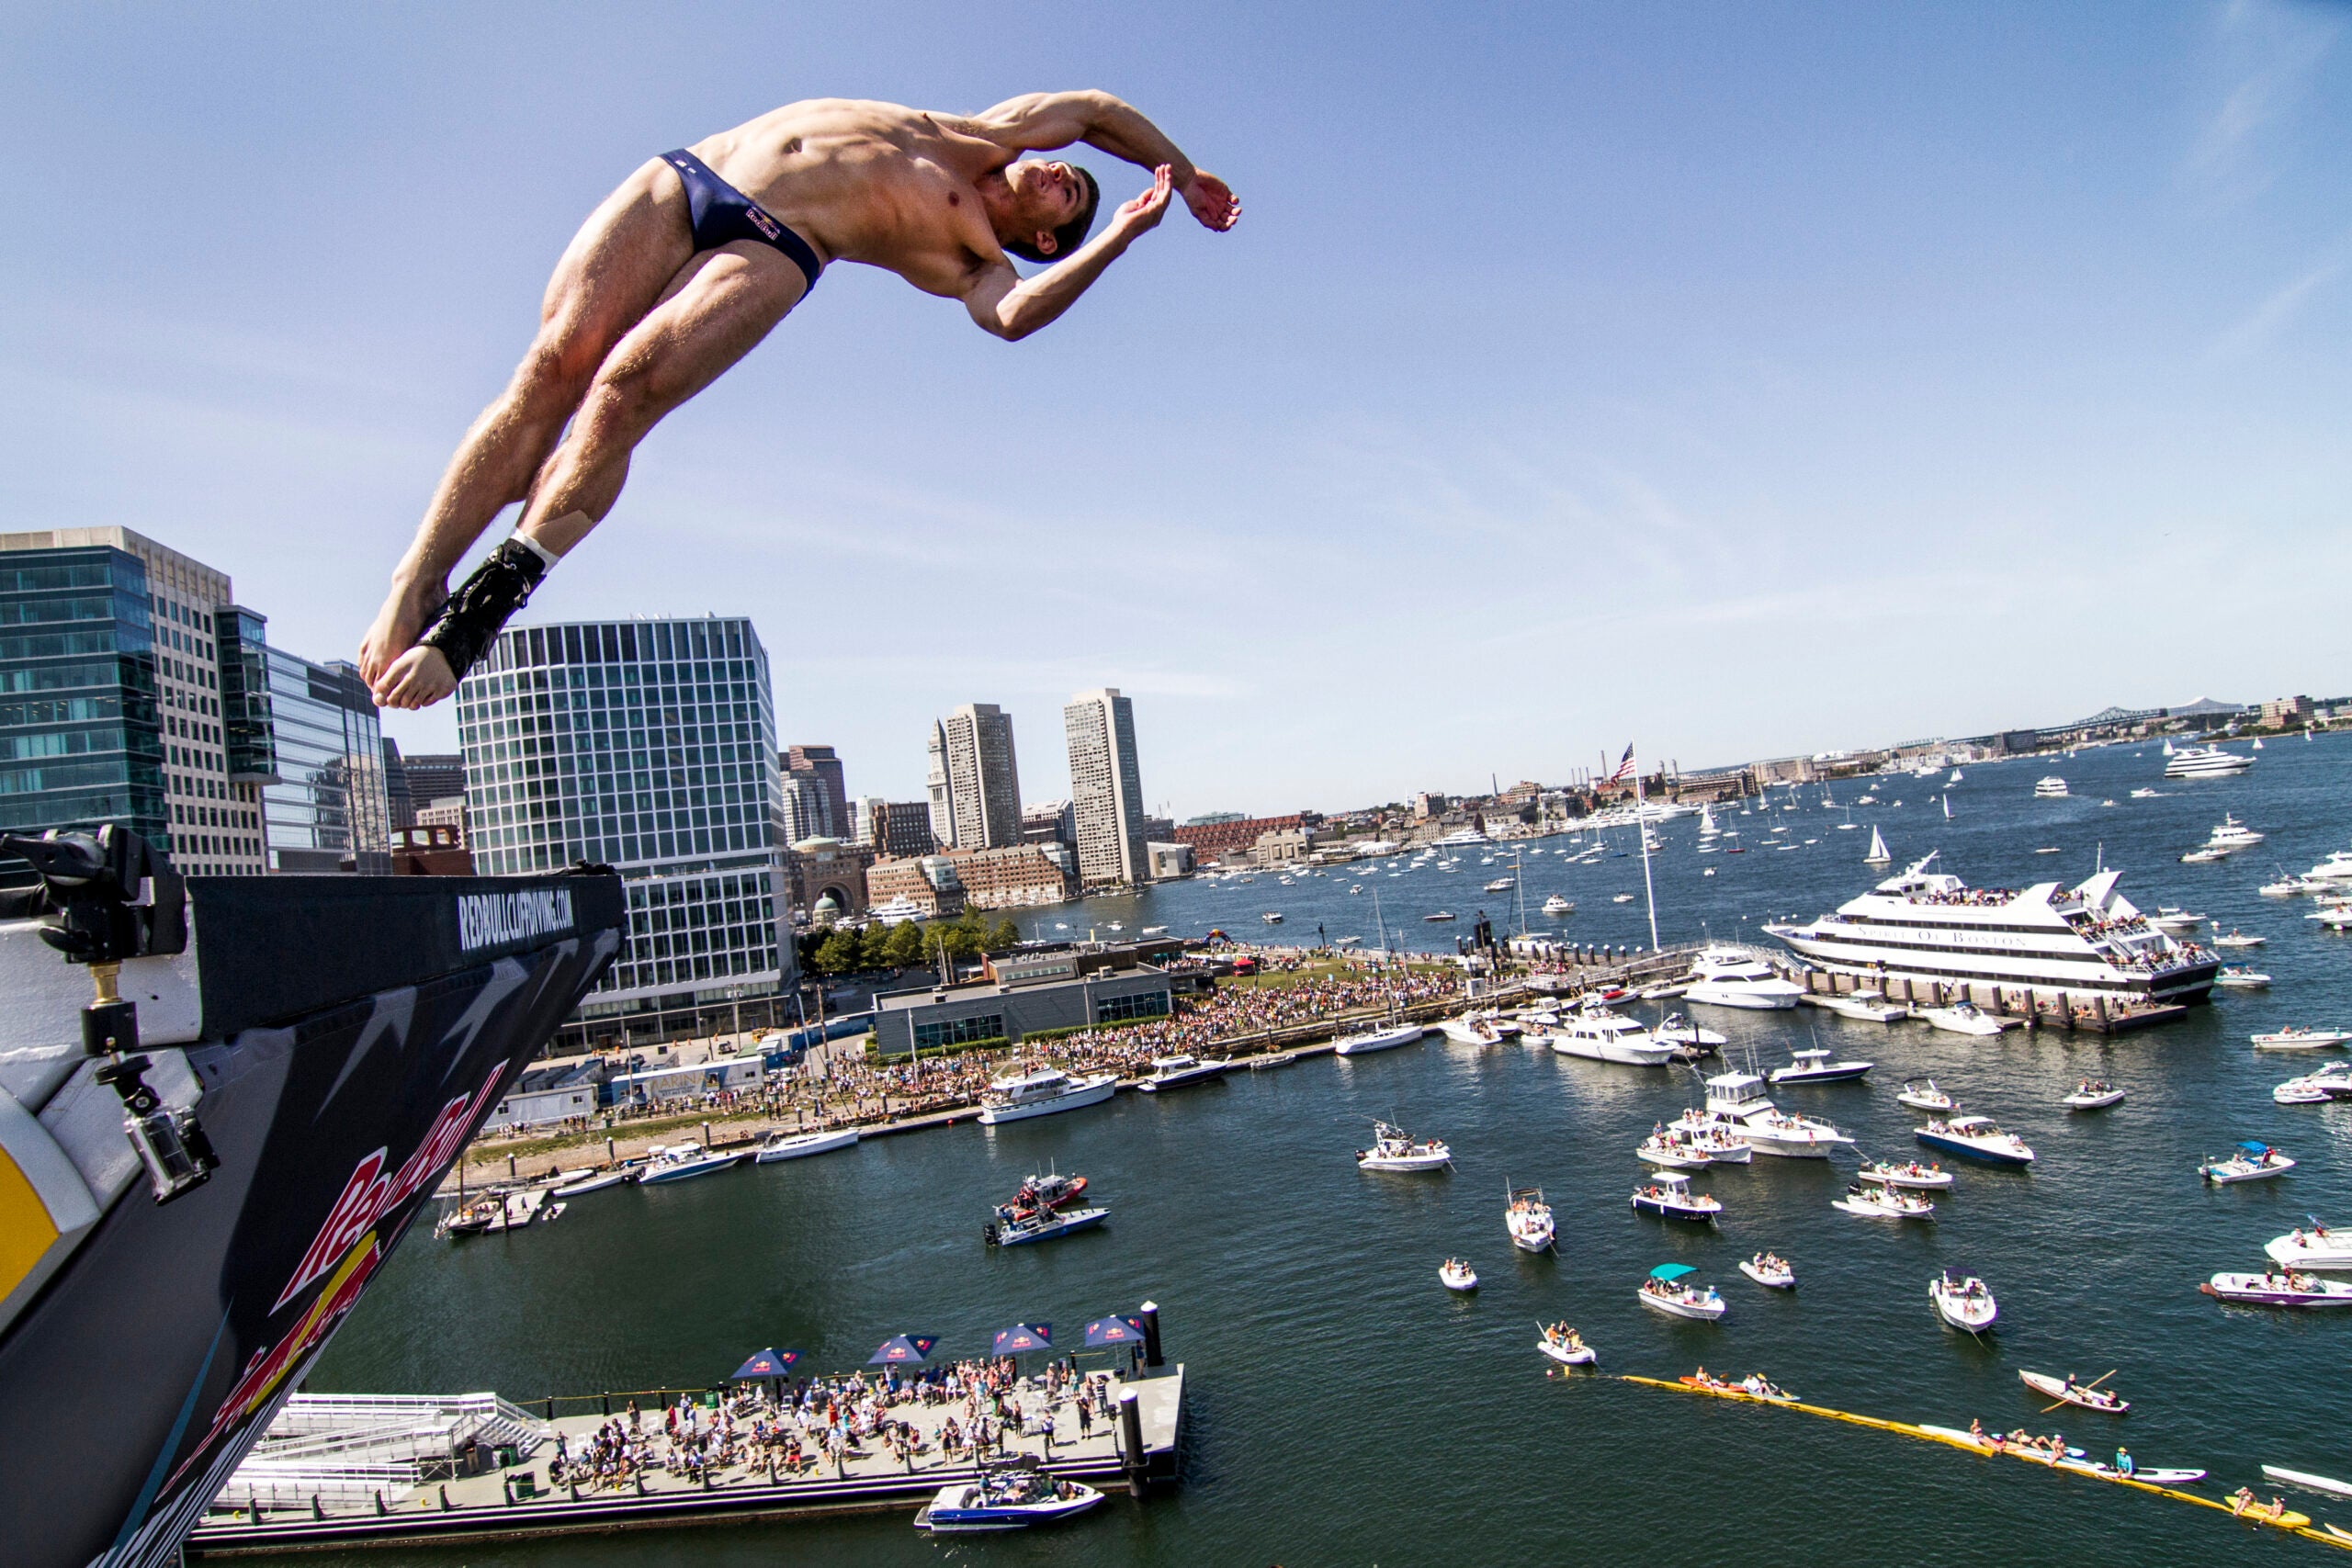 The Red Cliff Diving World Series is coming to Boston this summer | Boston.com